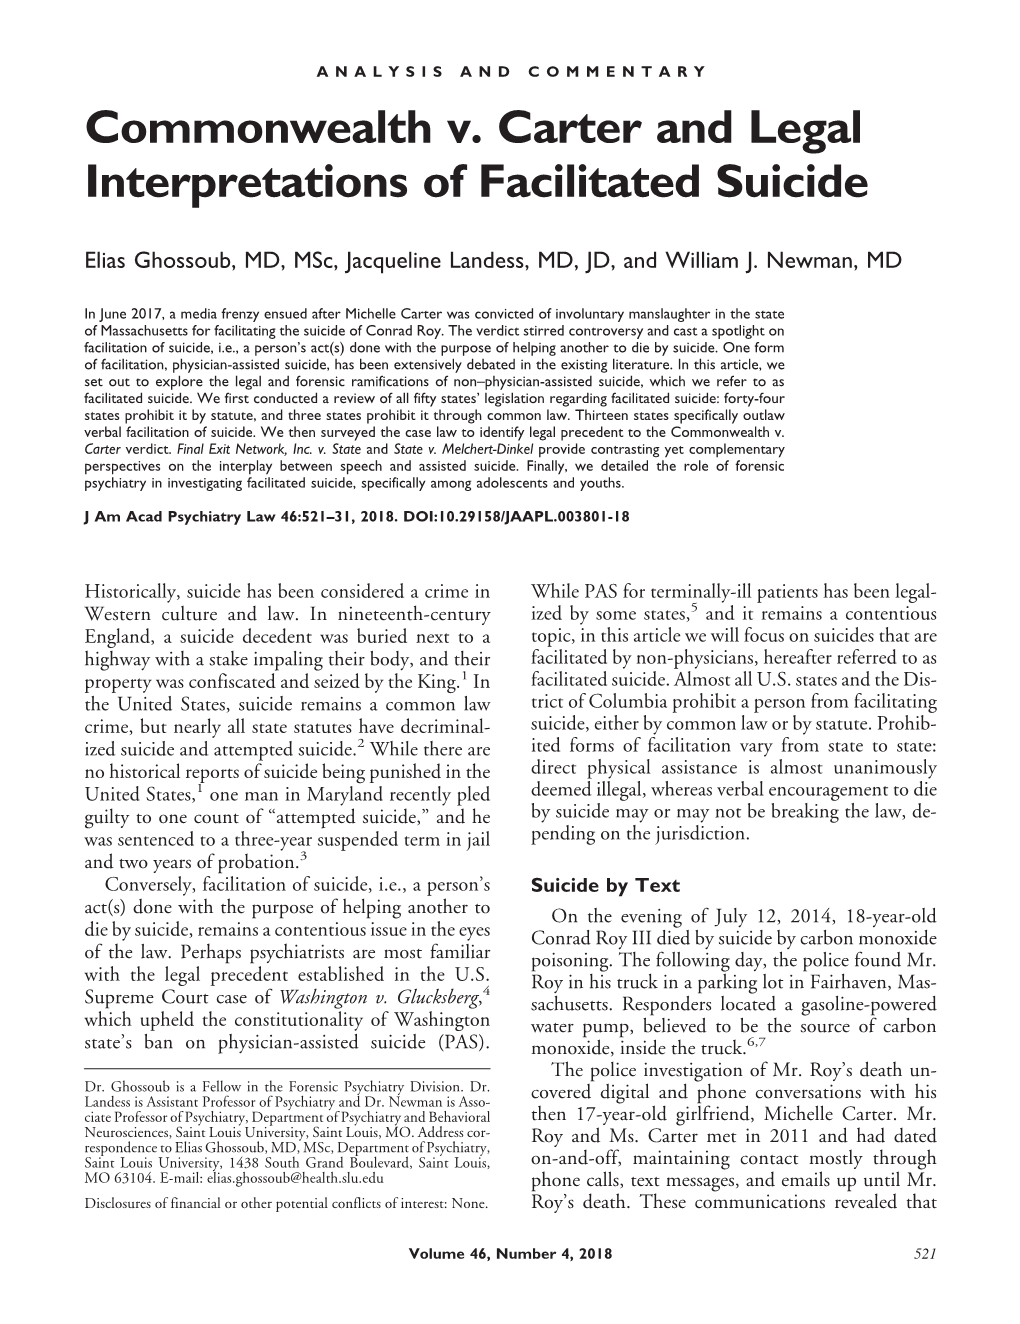 Commonwealth V. Carter and Legal Interpretations of Facilitated Suicide